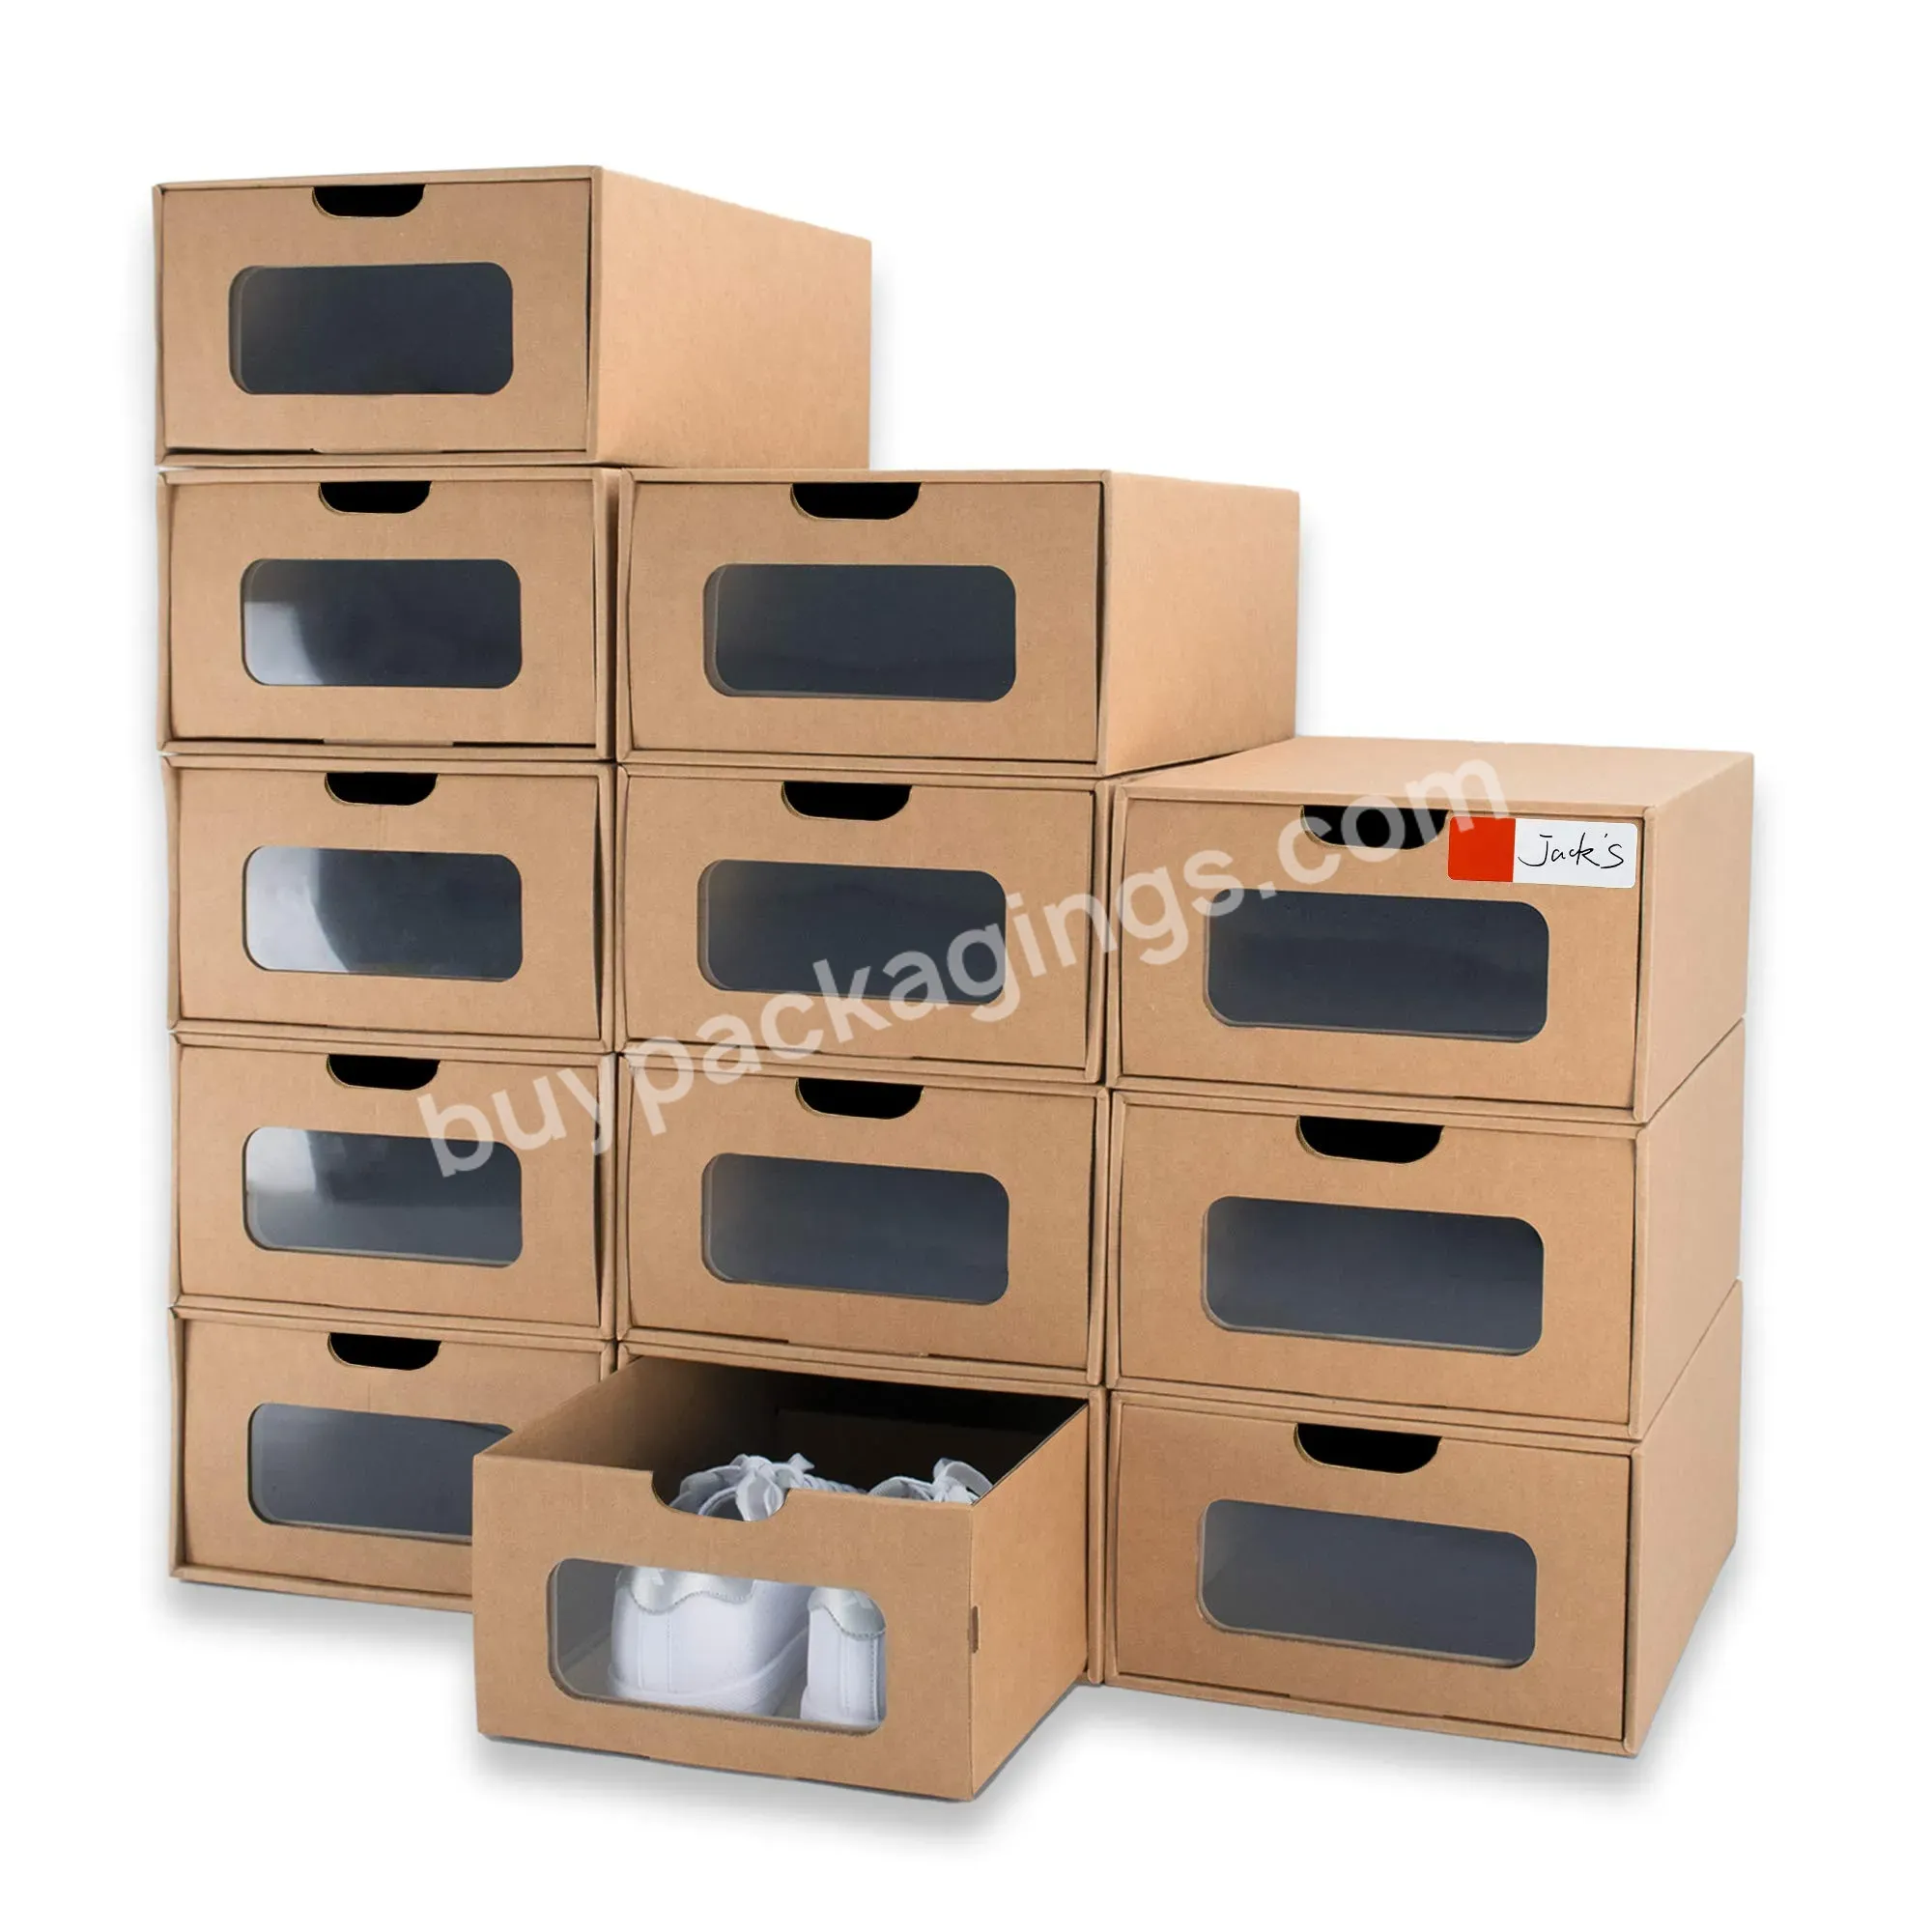 Wholesale Price Box For Shoe Packaging Customized Cardboard Packaging Paper Box Foldable Low Price Low Moq Datang